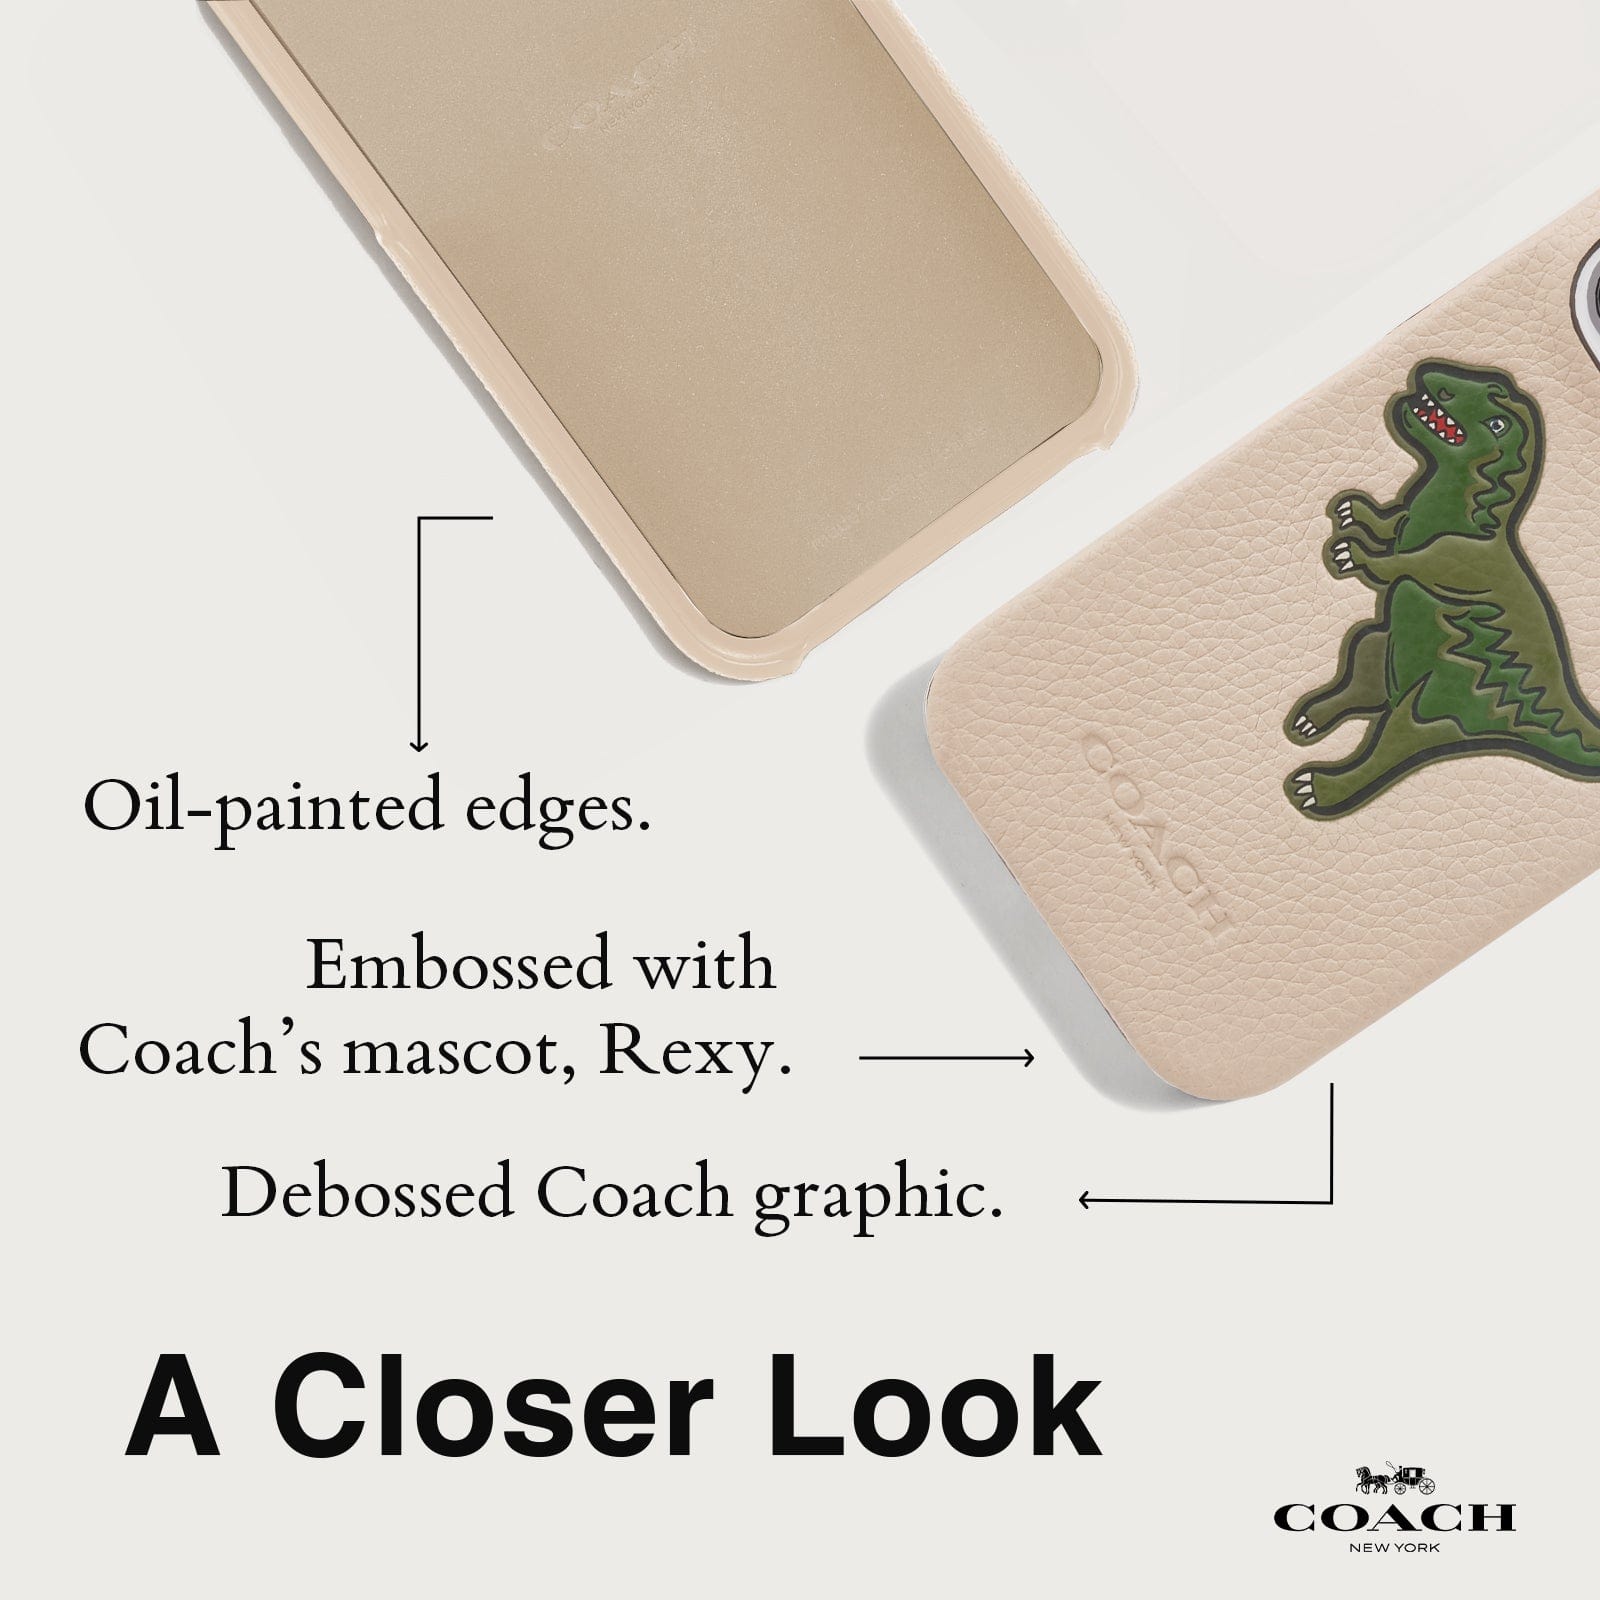 OIL-PAINTED EDGES. EMBOSSED WITH COACH'S MASCOT, REXY. DEBOSSED COACH GRAPHIC. A CLOSER LOOK